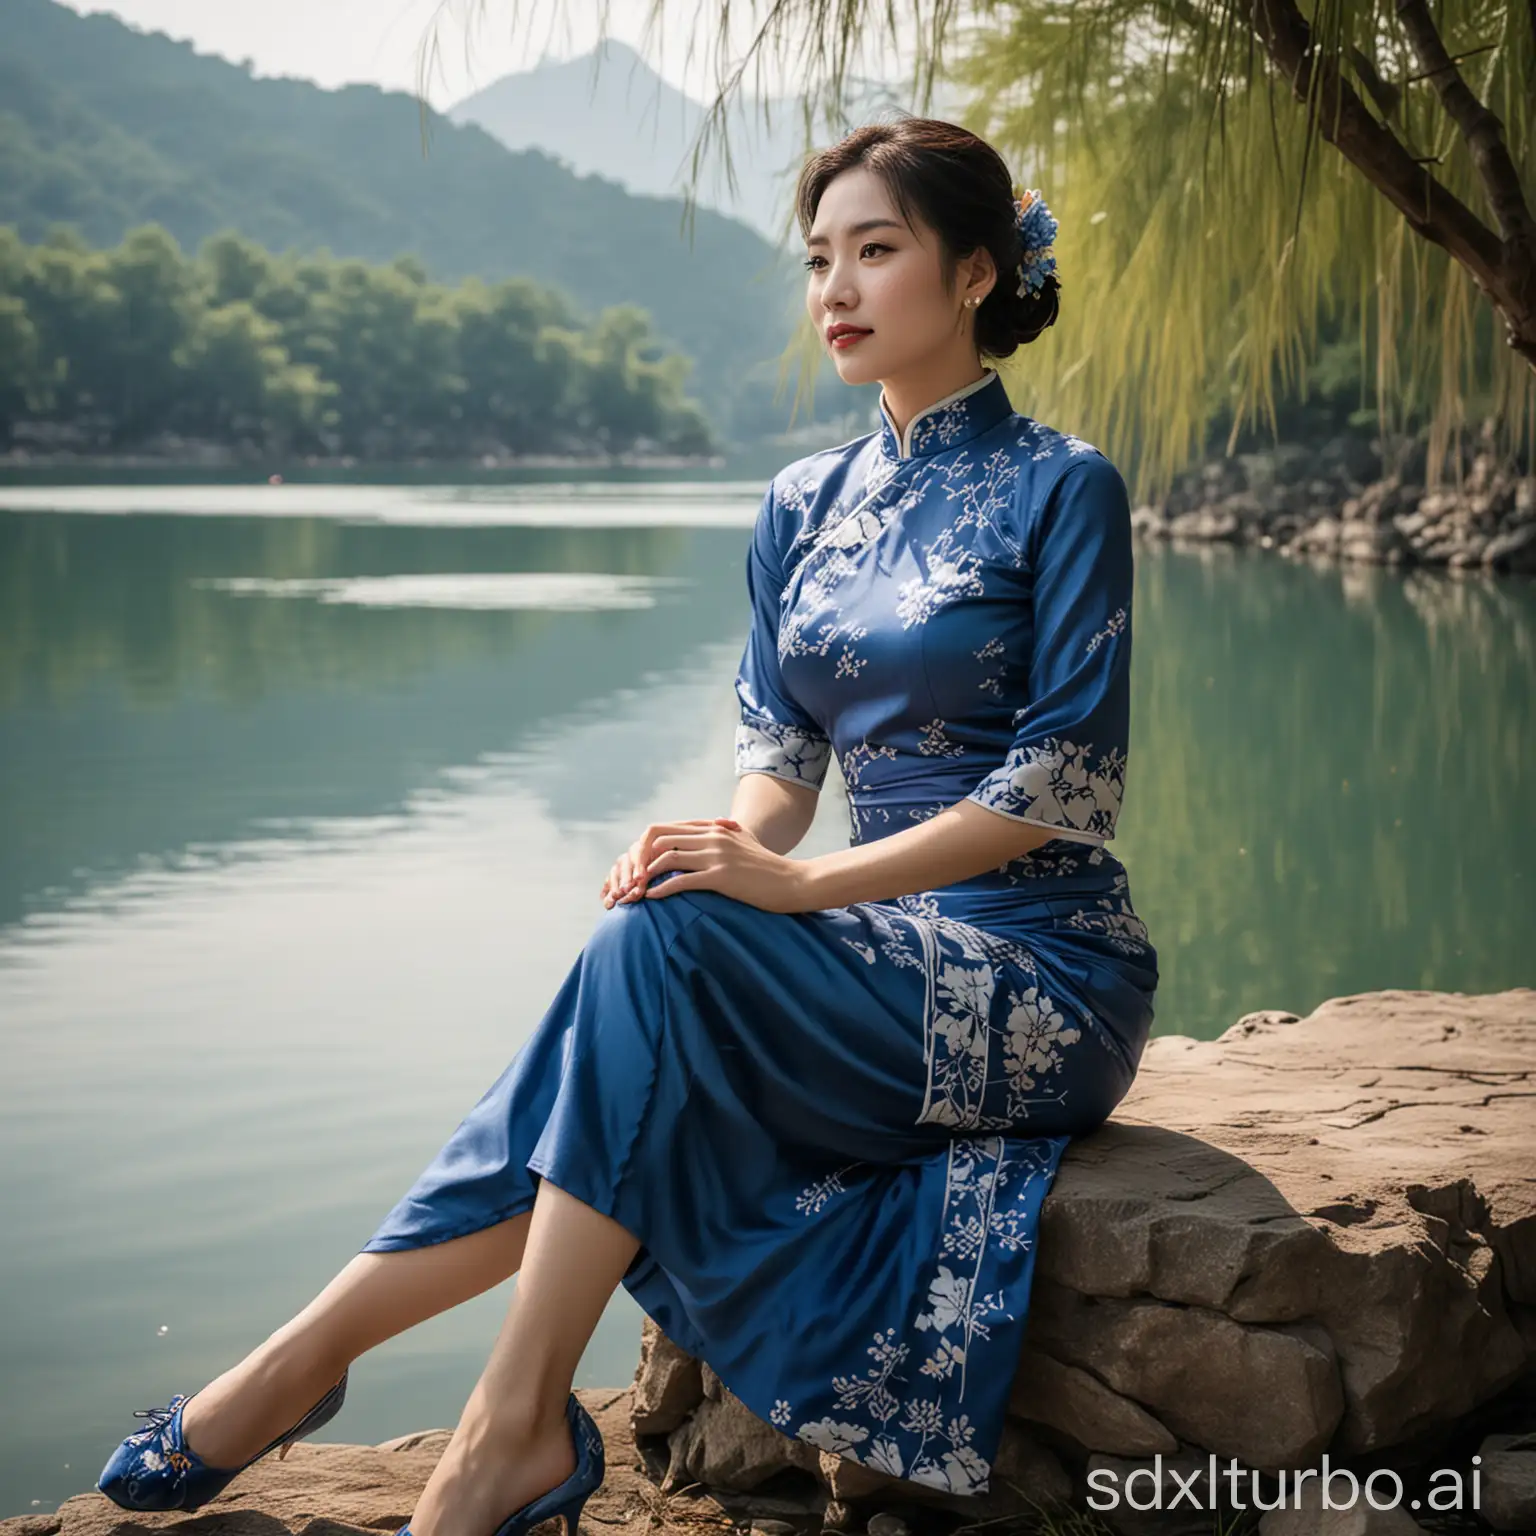 Woman-in-MidBlue-Qipao-Sitting-by-the-Lake